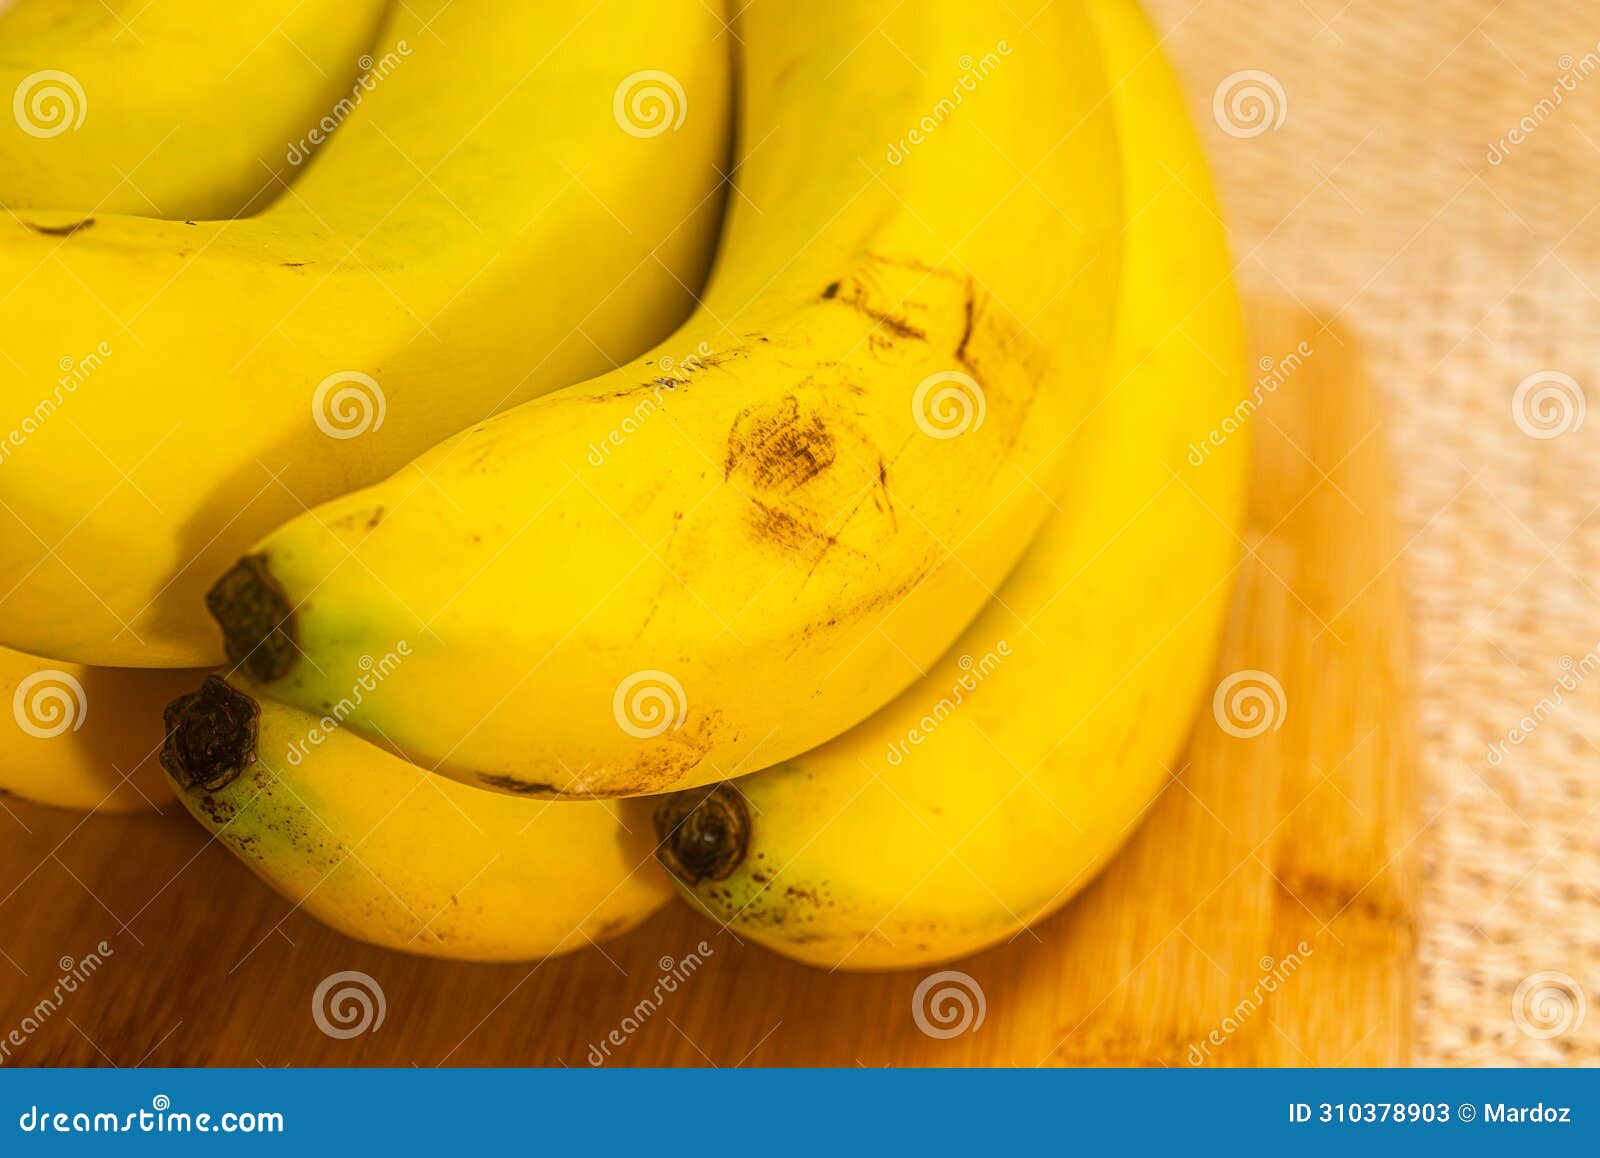 bananas with yute texture in the background